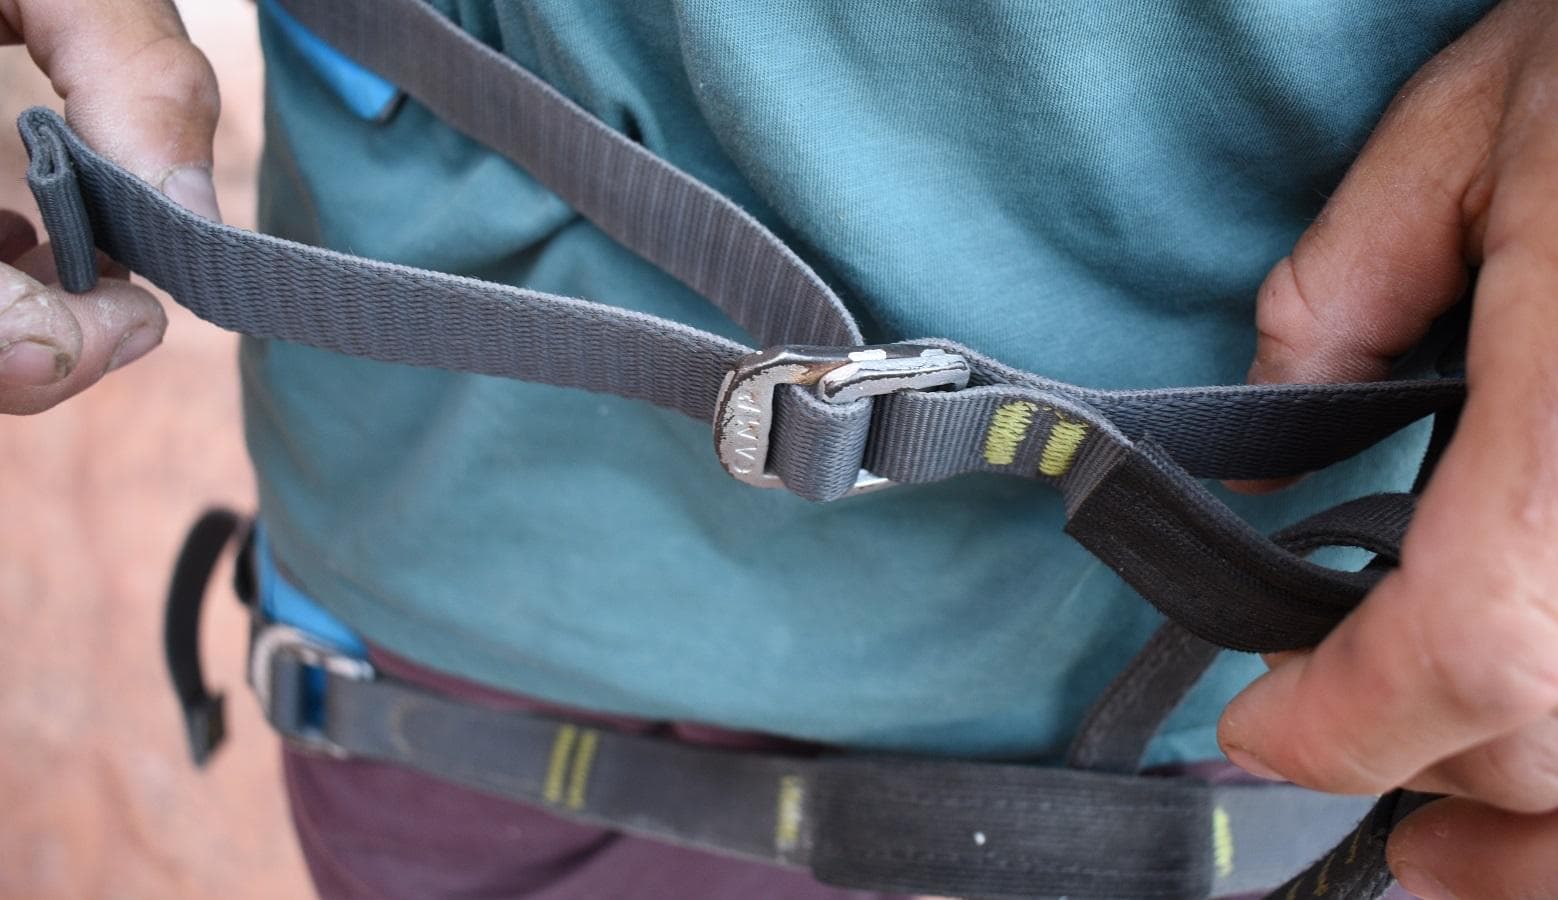 Buckles are double-backed